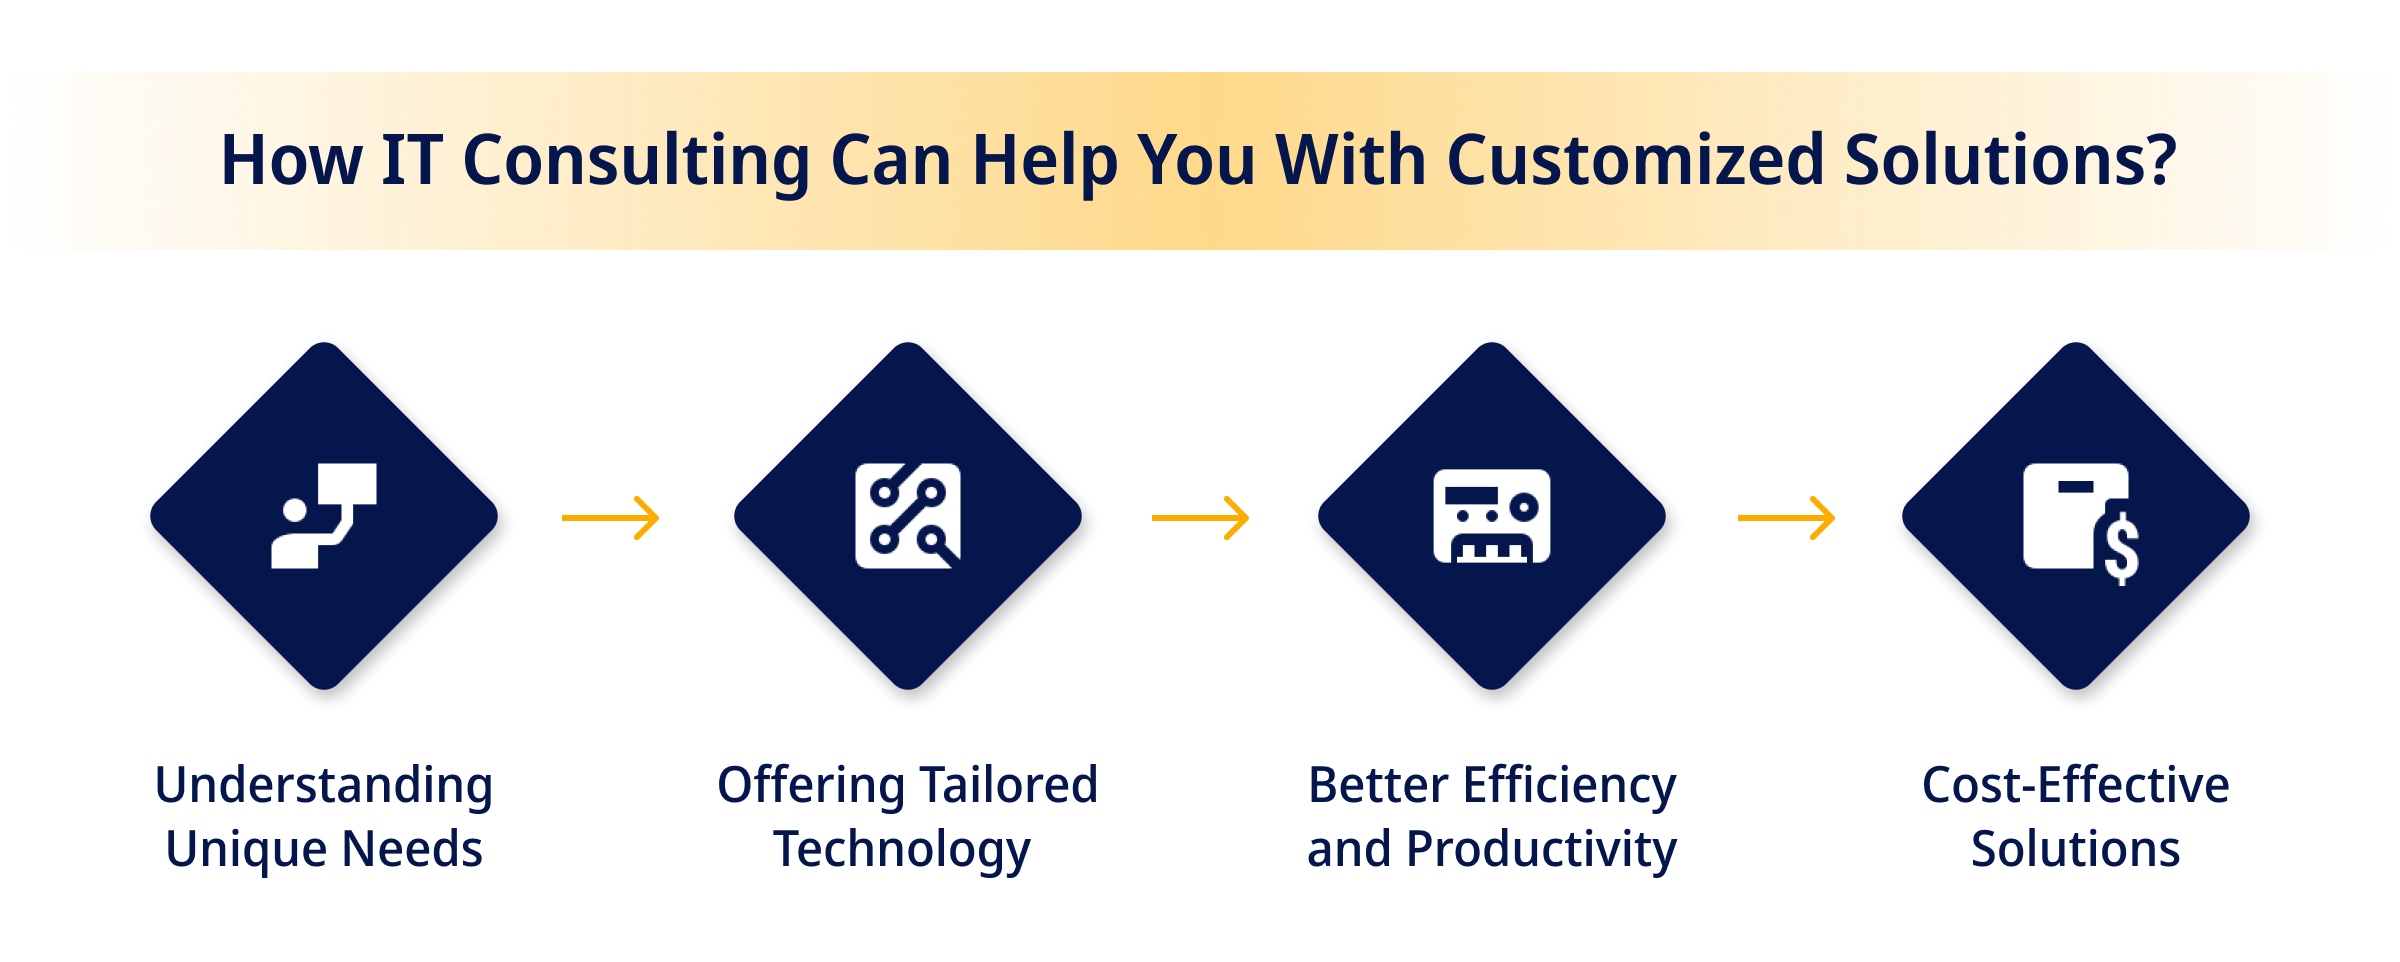 How IT Consulting Can Help You With Customized Solutions